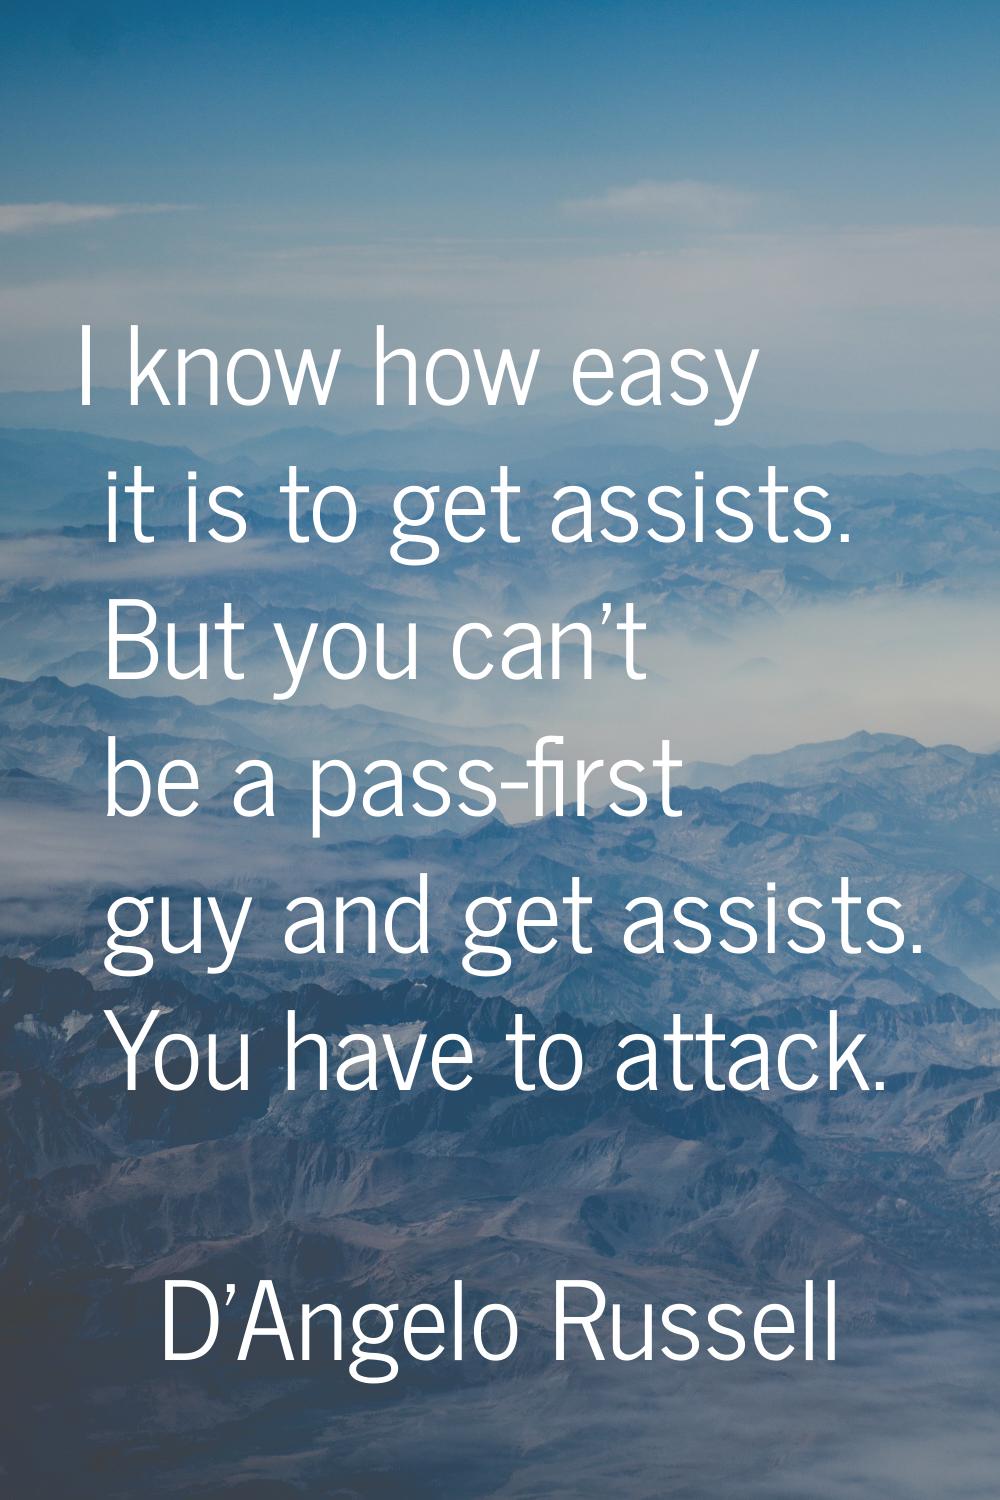 I know how easy it is to get assists. But you can't be a pass-first guy and get assists. You have t